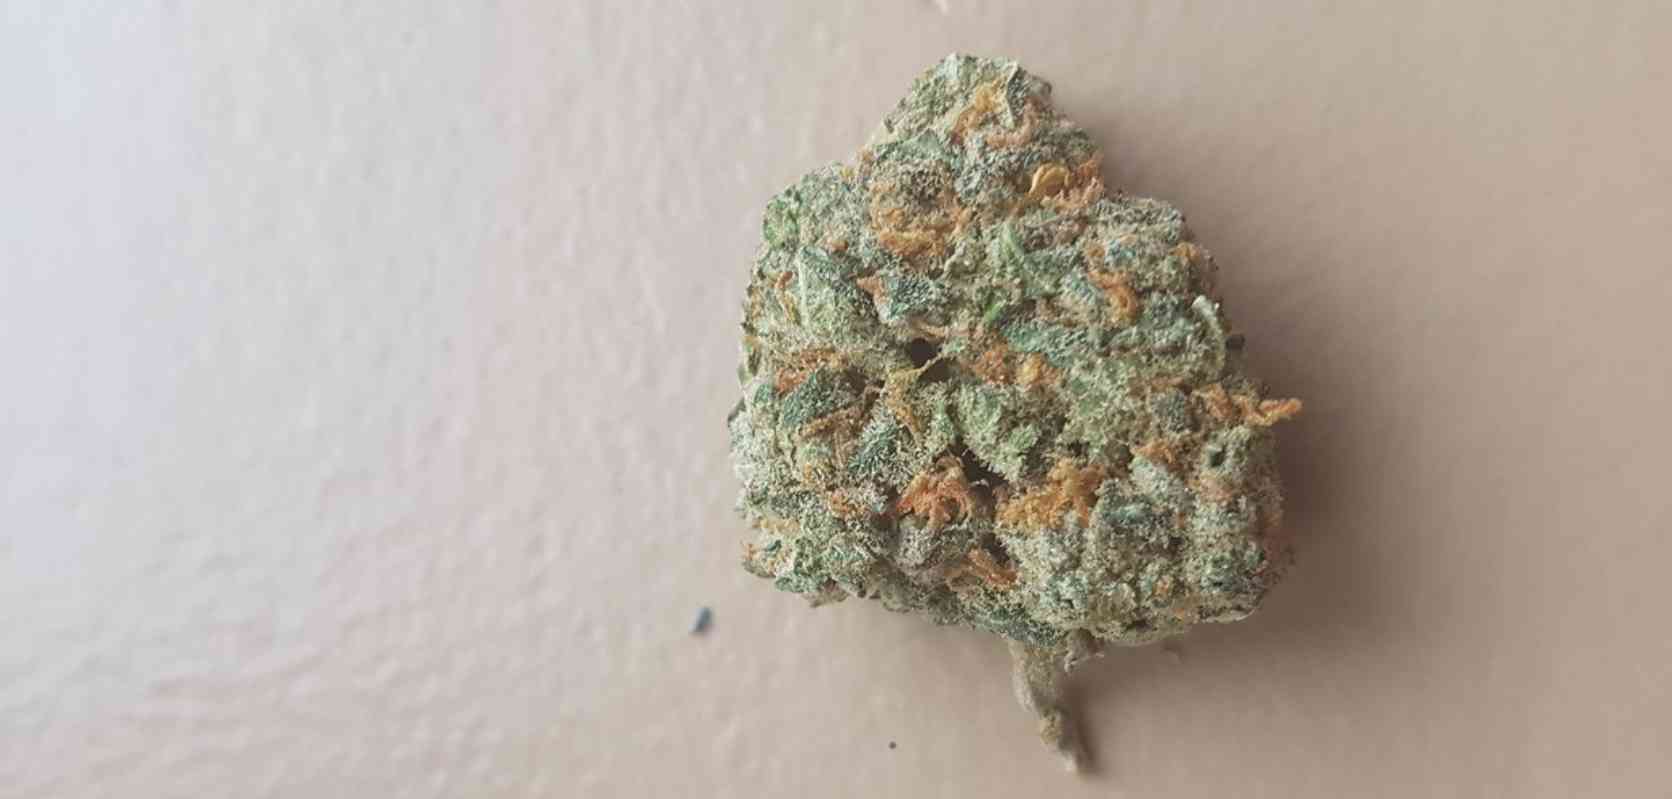 Nuken strain is one of the few cannabis buds making waves among North American stoners. 